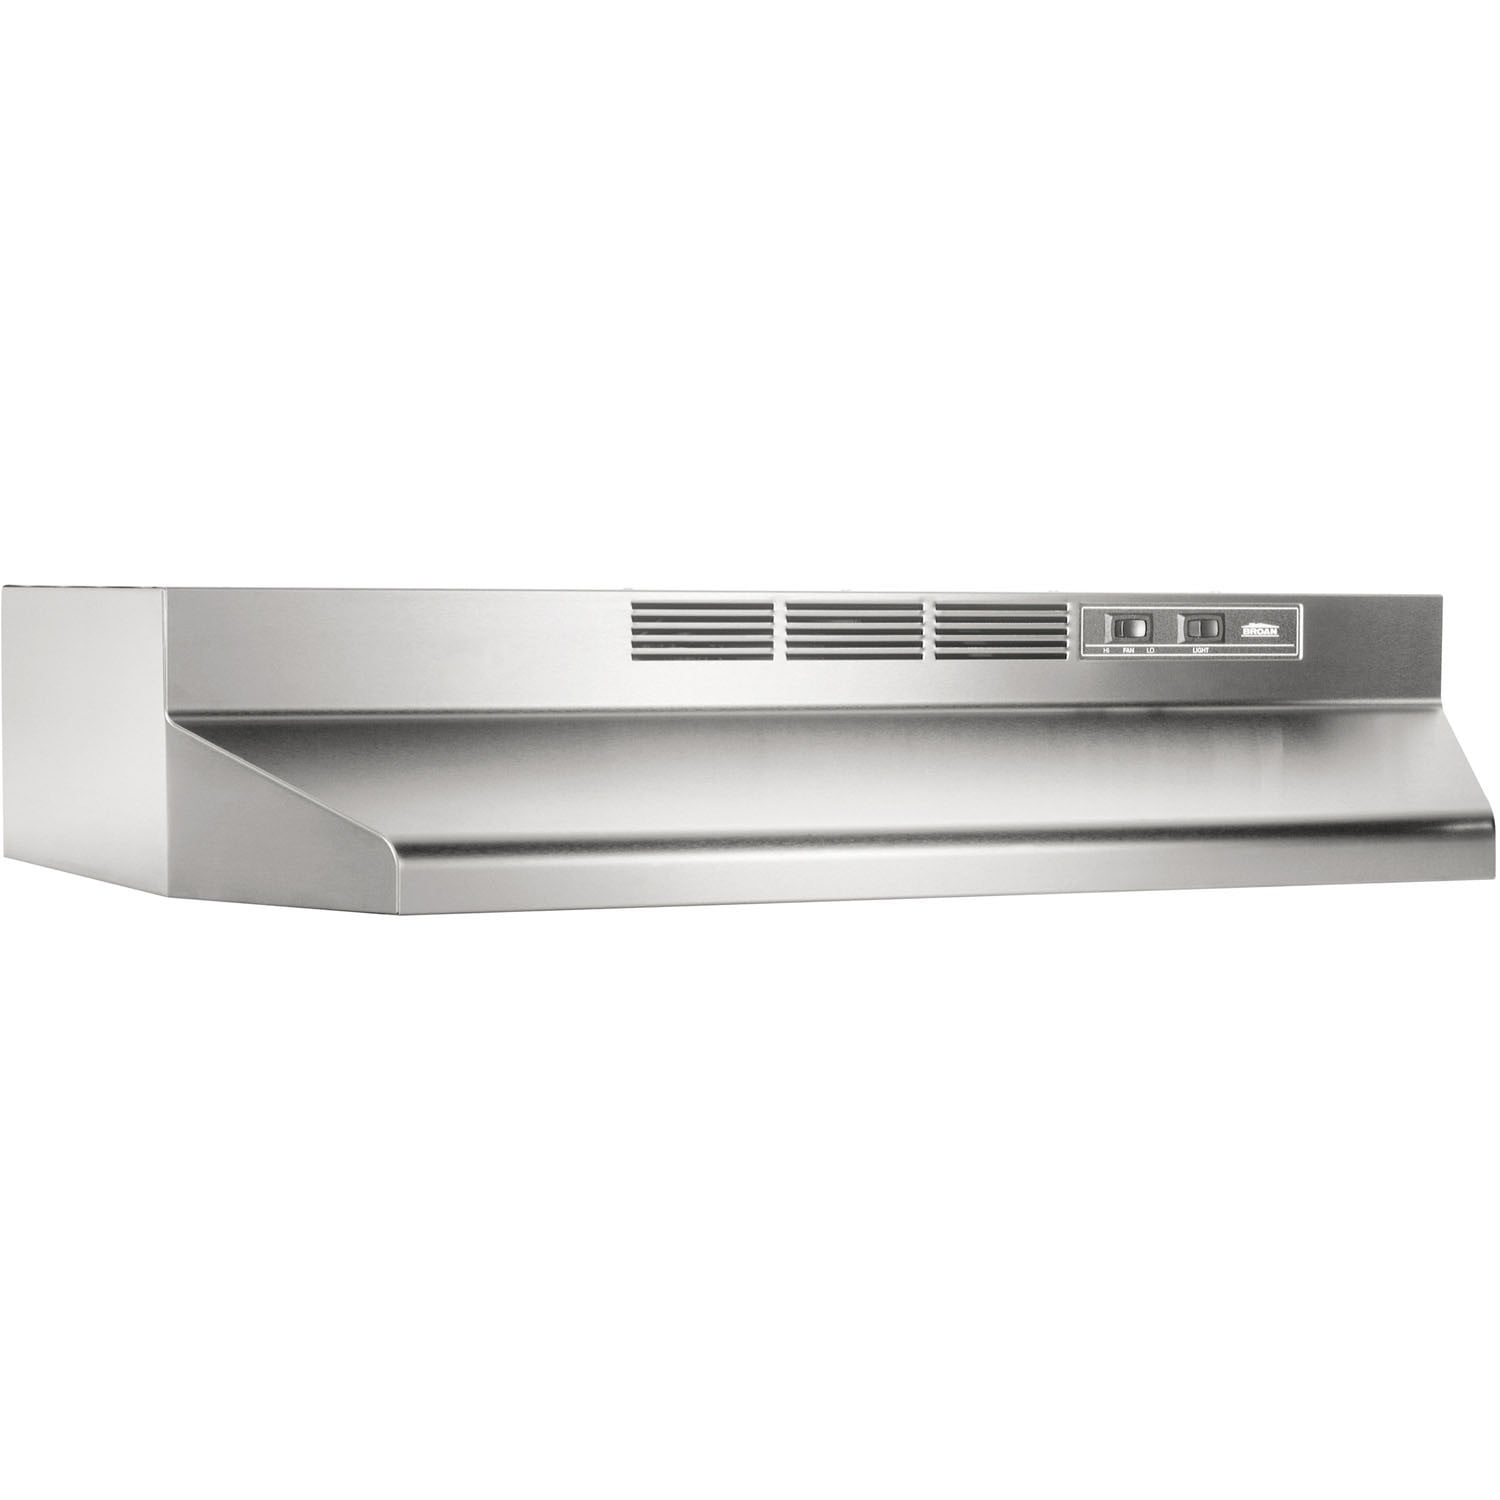 Broan 413002 ADA Capable Non-Ducted Under-Cabinet Range Hood Bisque 30-Inch 